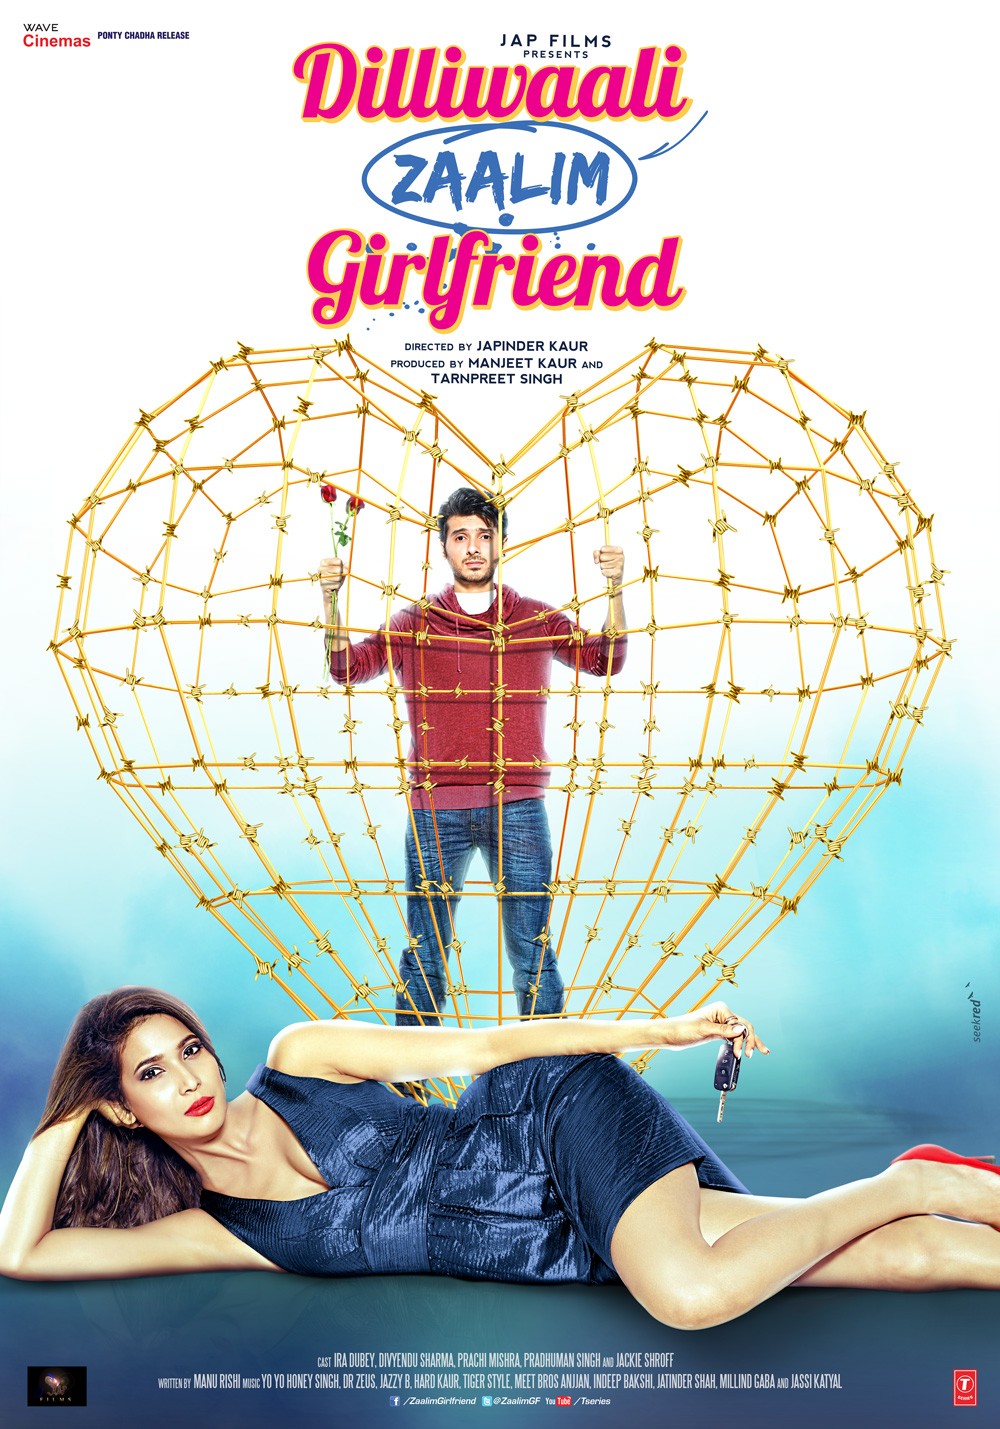 Extra Large Movie Poster Image for Dilliwaali Zaalim Girlfriend (#5 of 7)